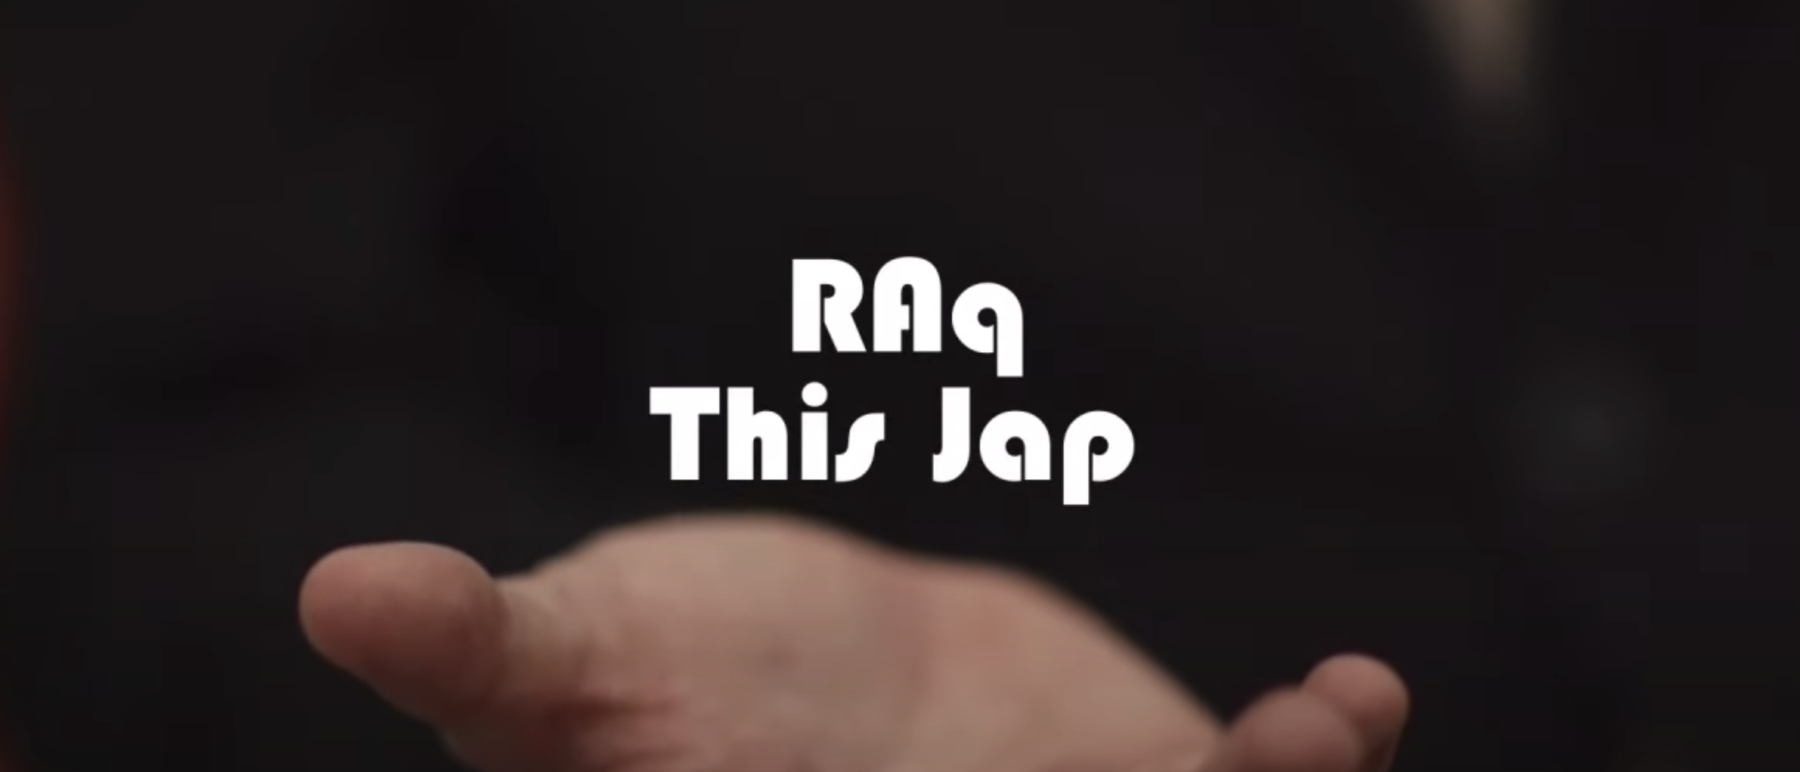 Music Video - This Jap by RAq